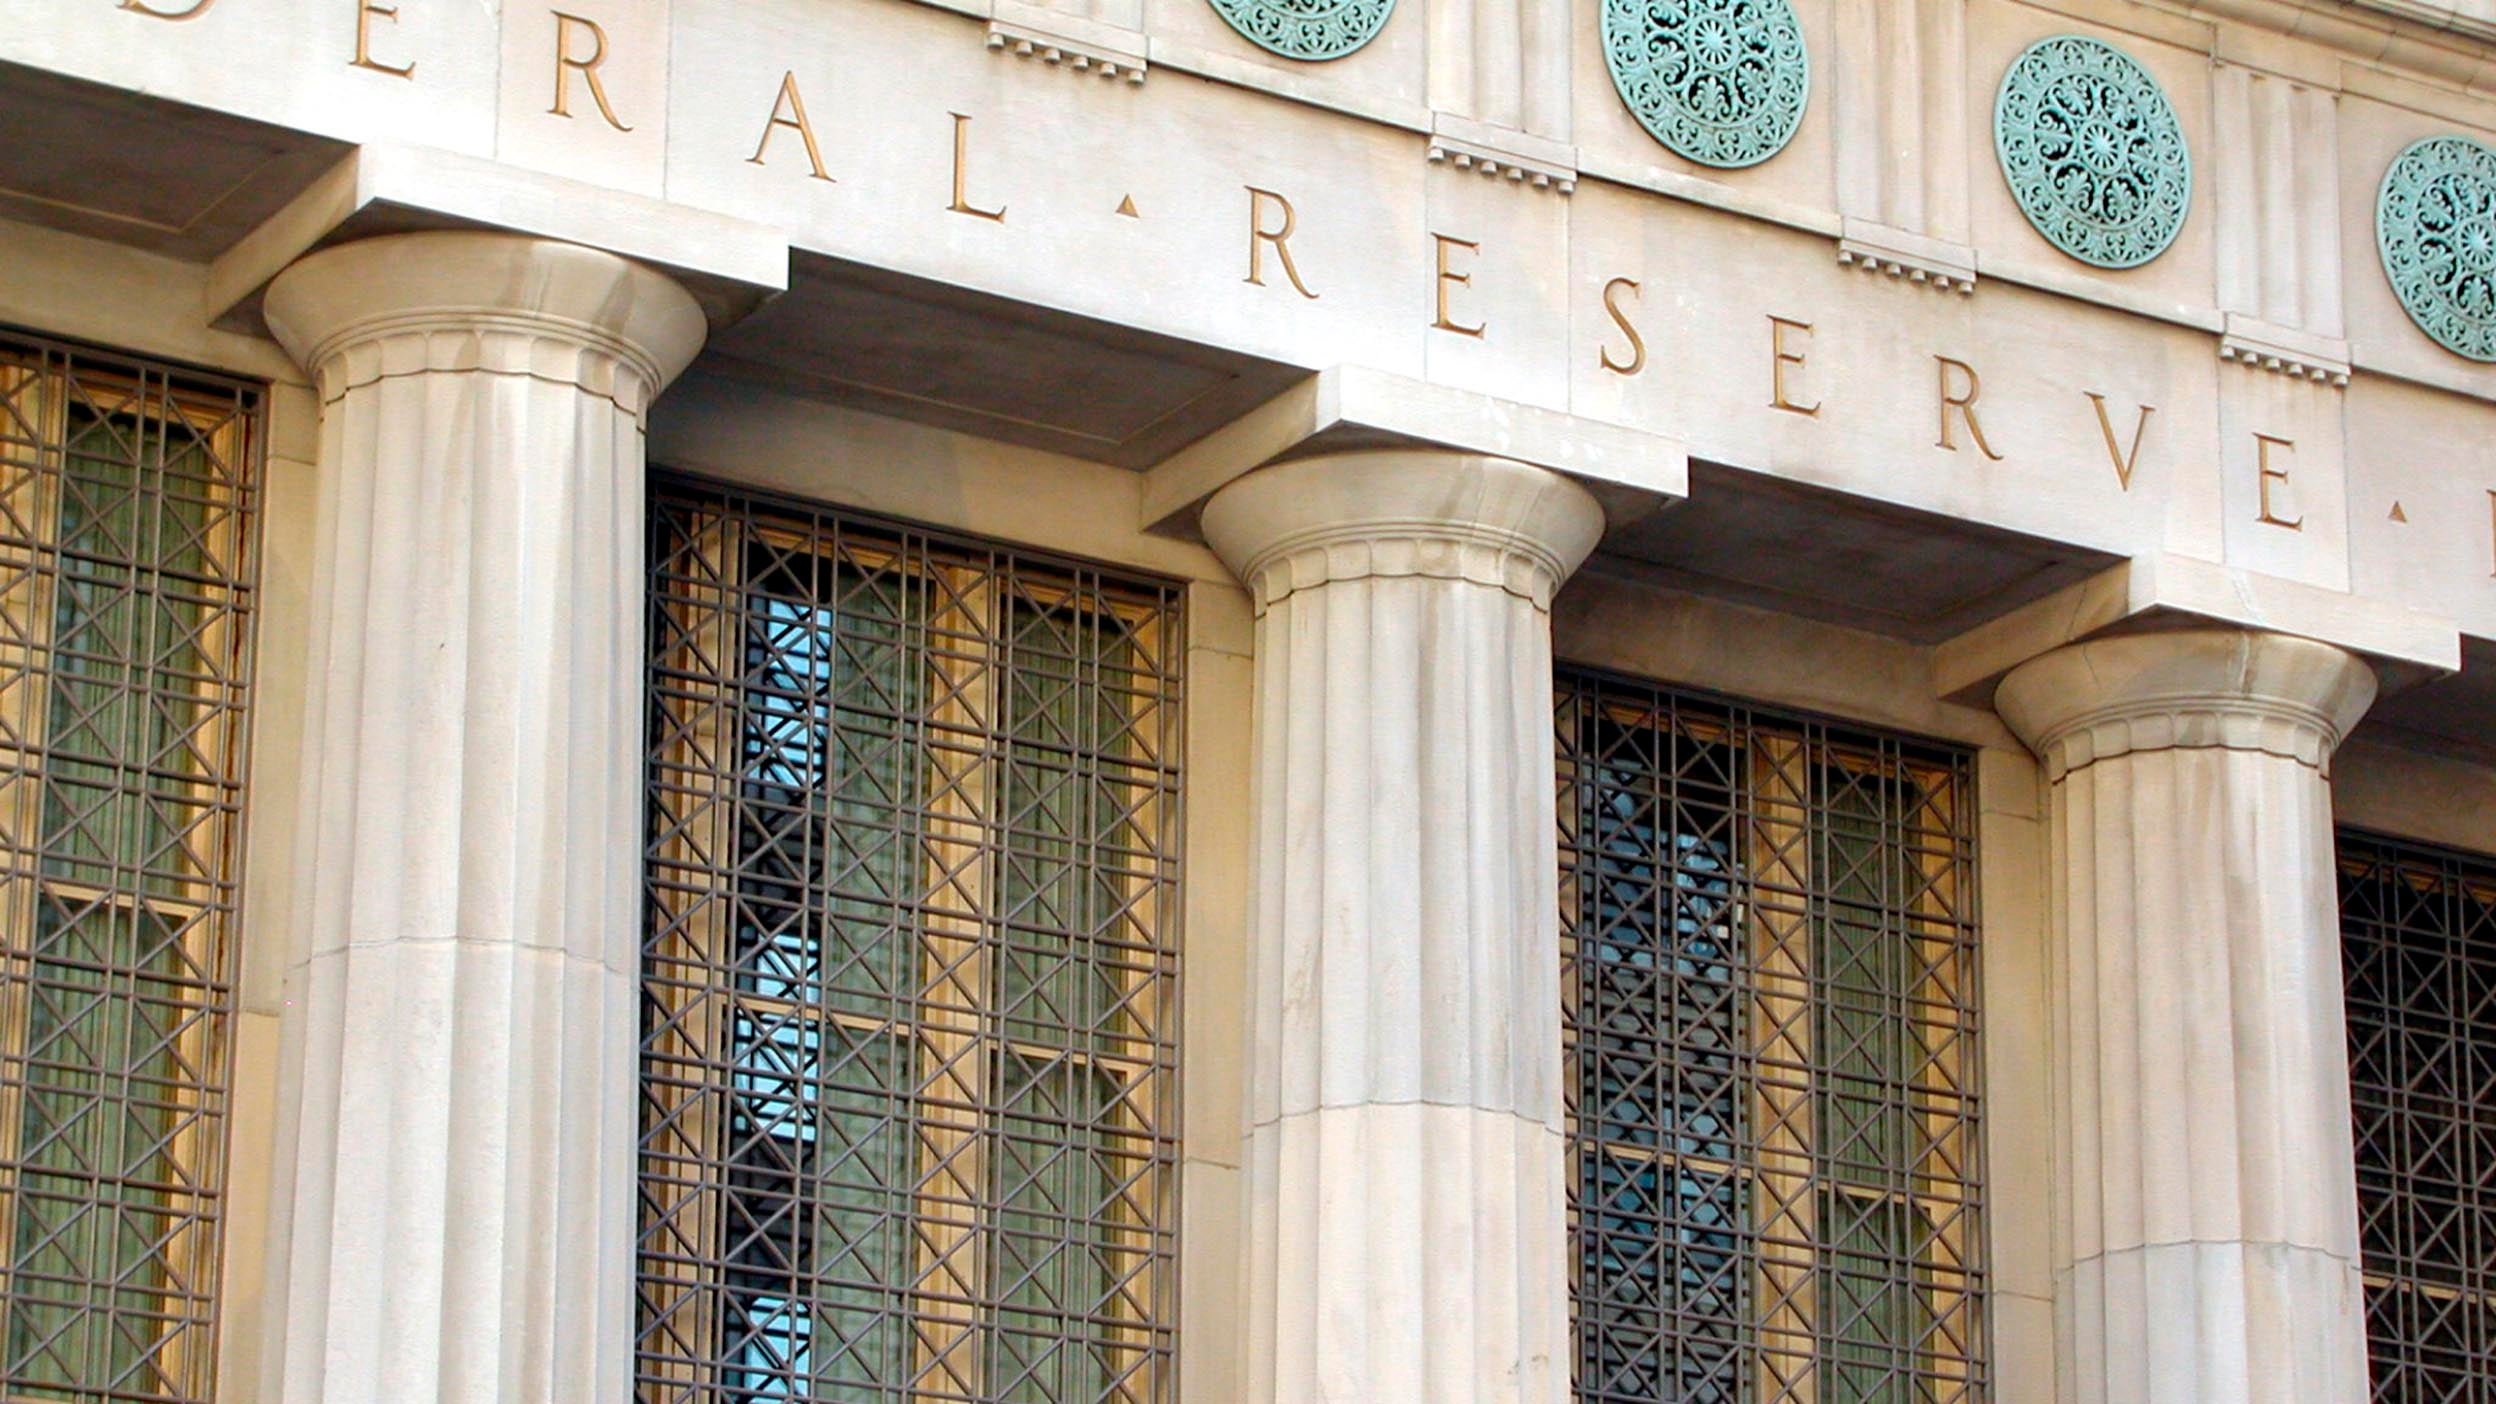 The United States Federal Reserve building in Washington, DC.